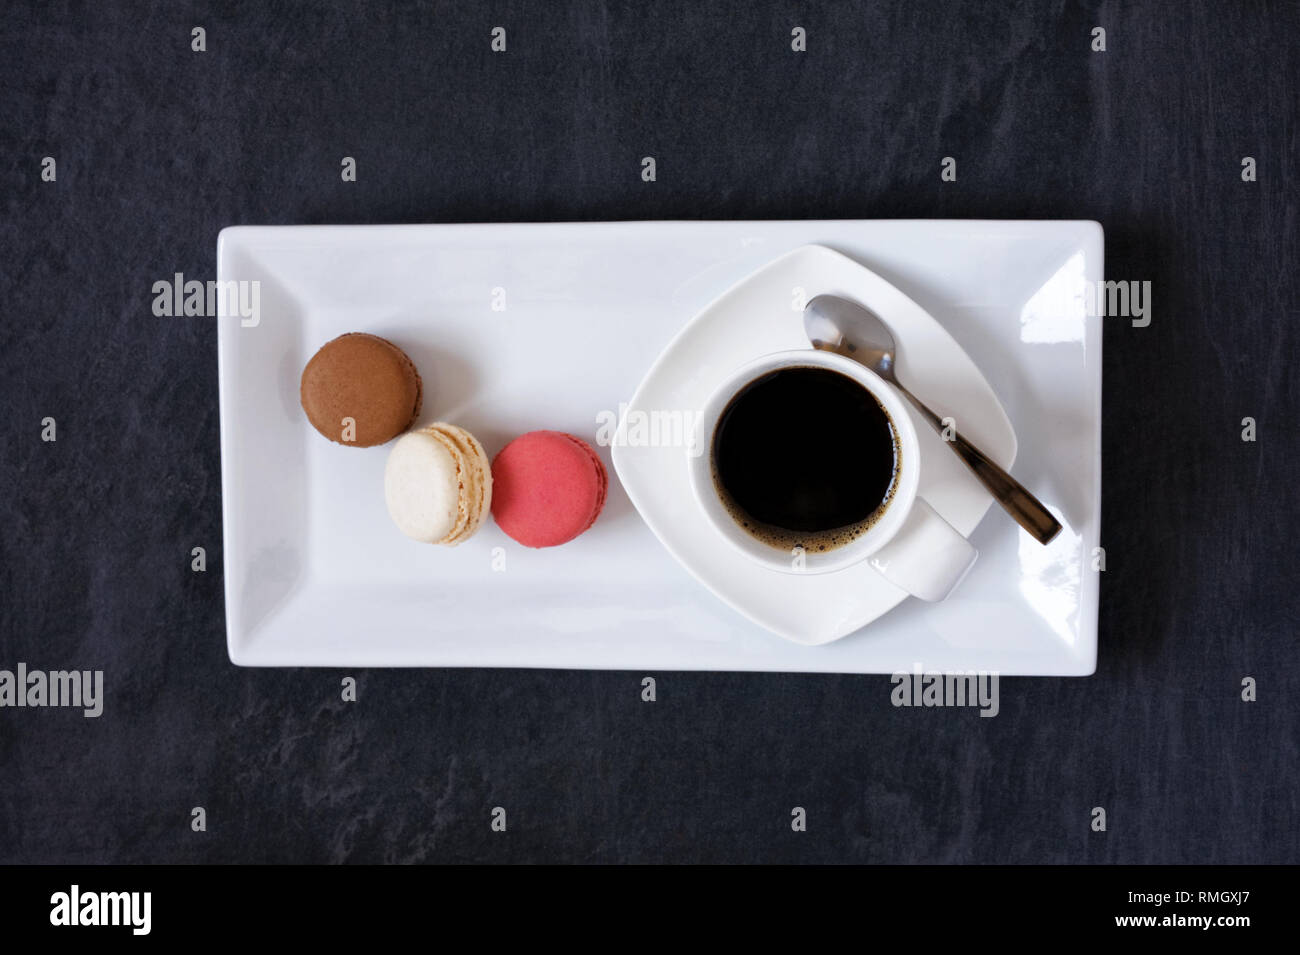 Cup of coffee and three macarons. Stock Photo